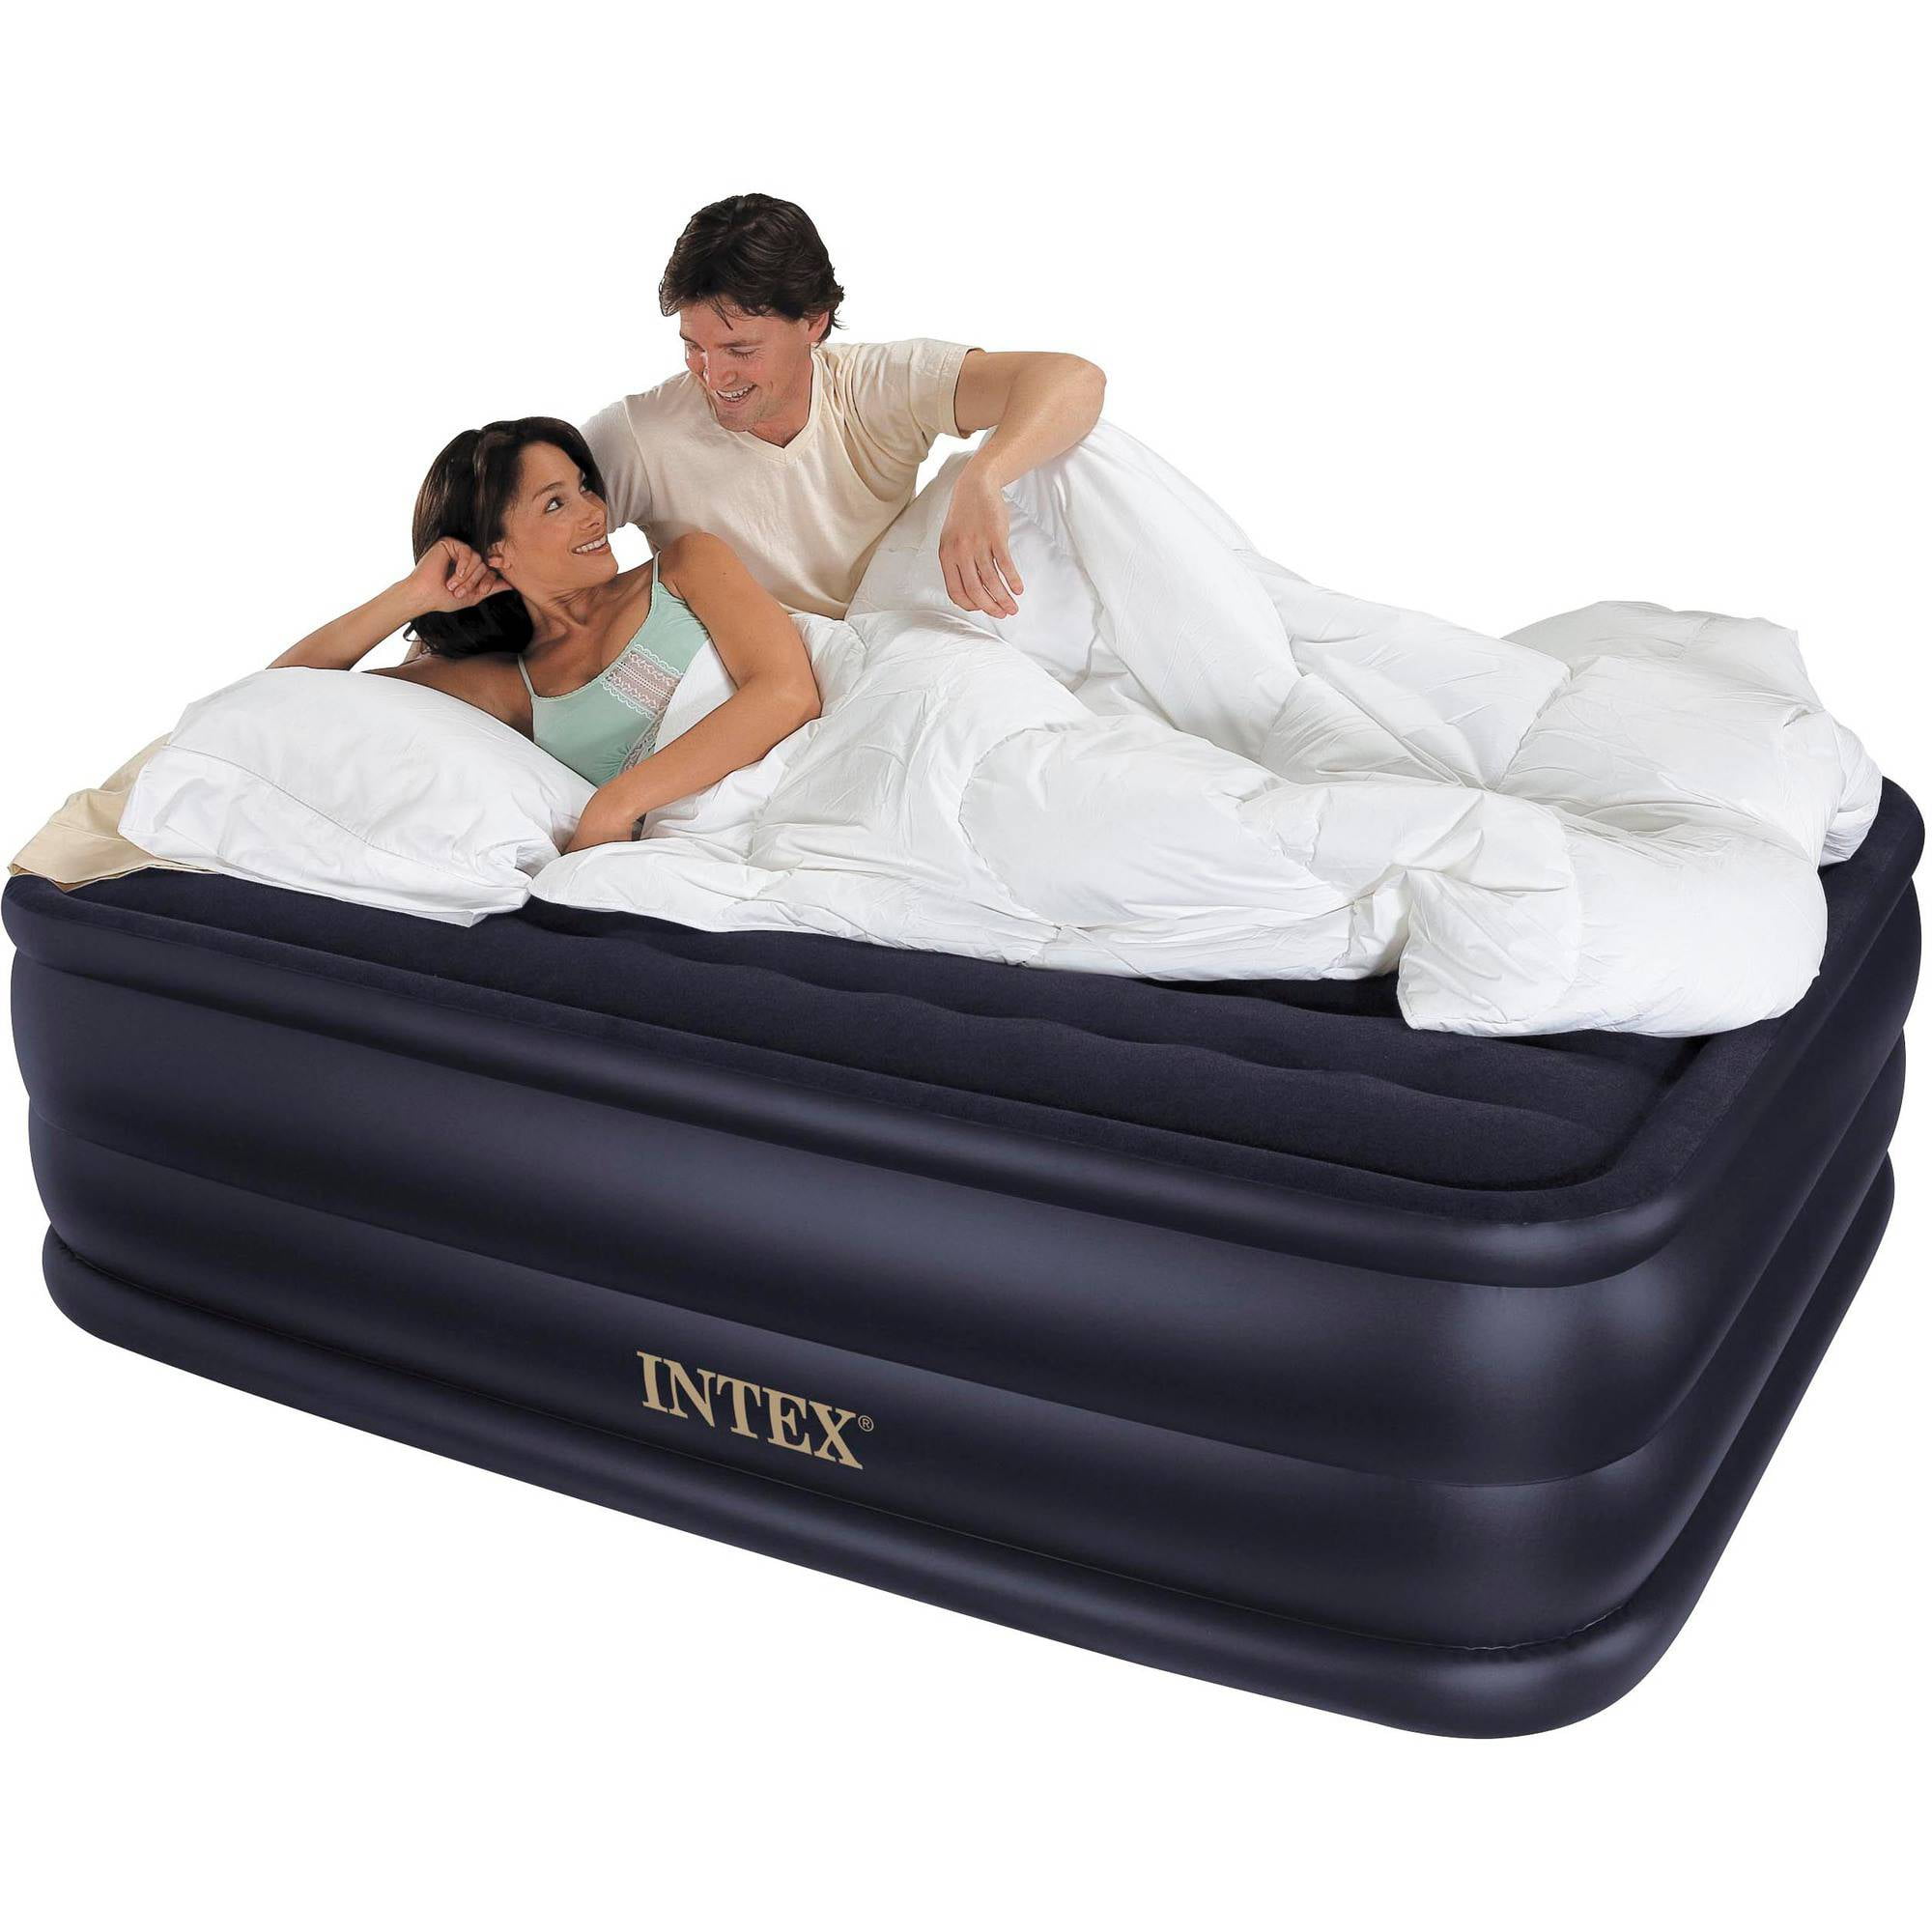 22" Queen Dura-Beam Raised Air Mattress Bed Inflatable Pump Camping Blow Up